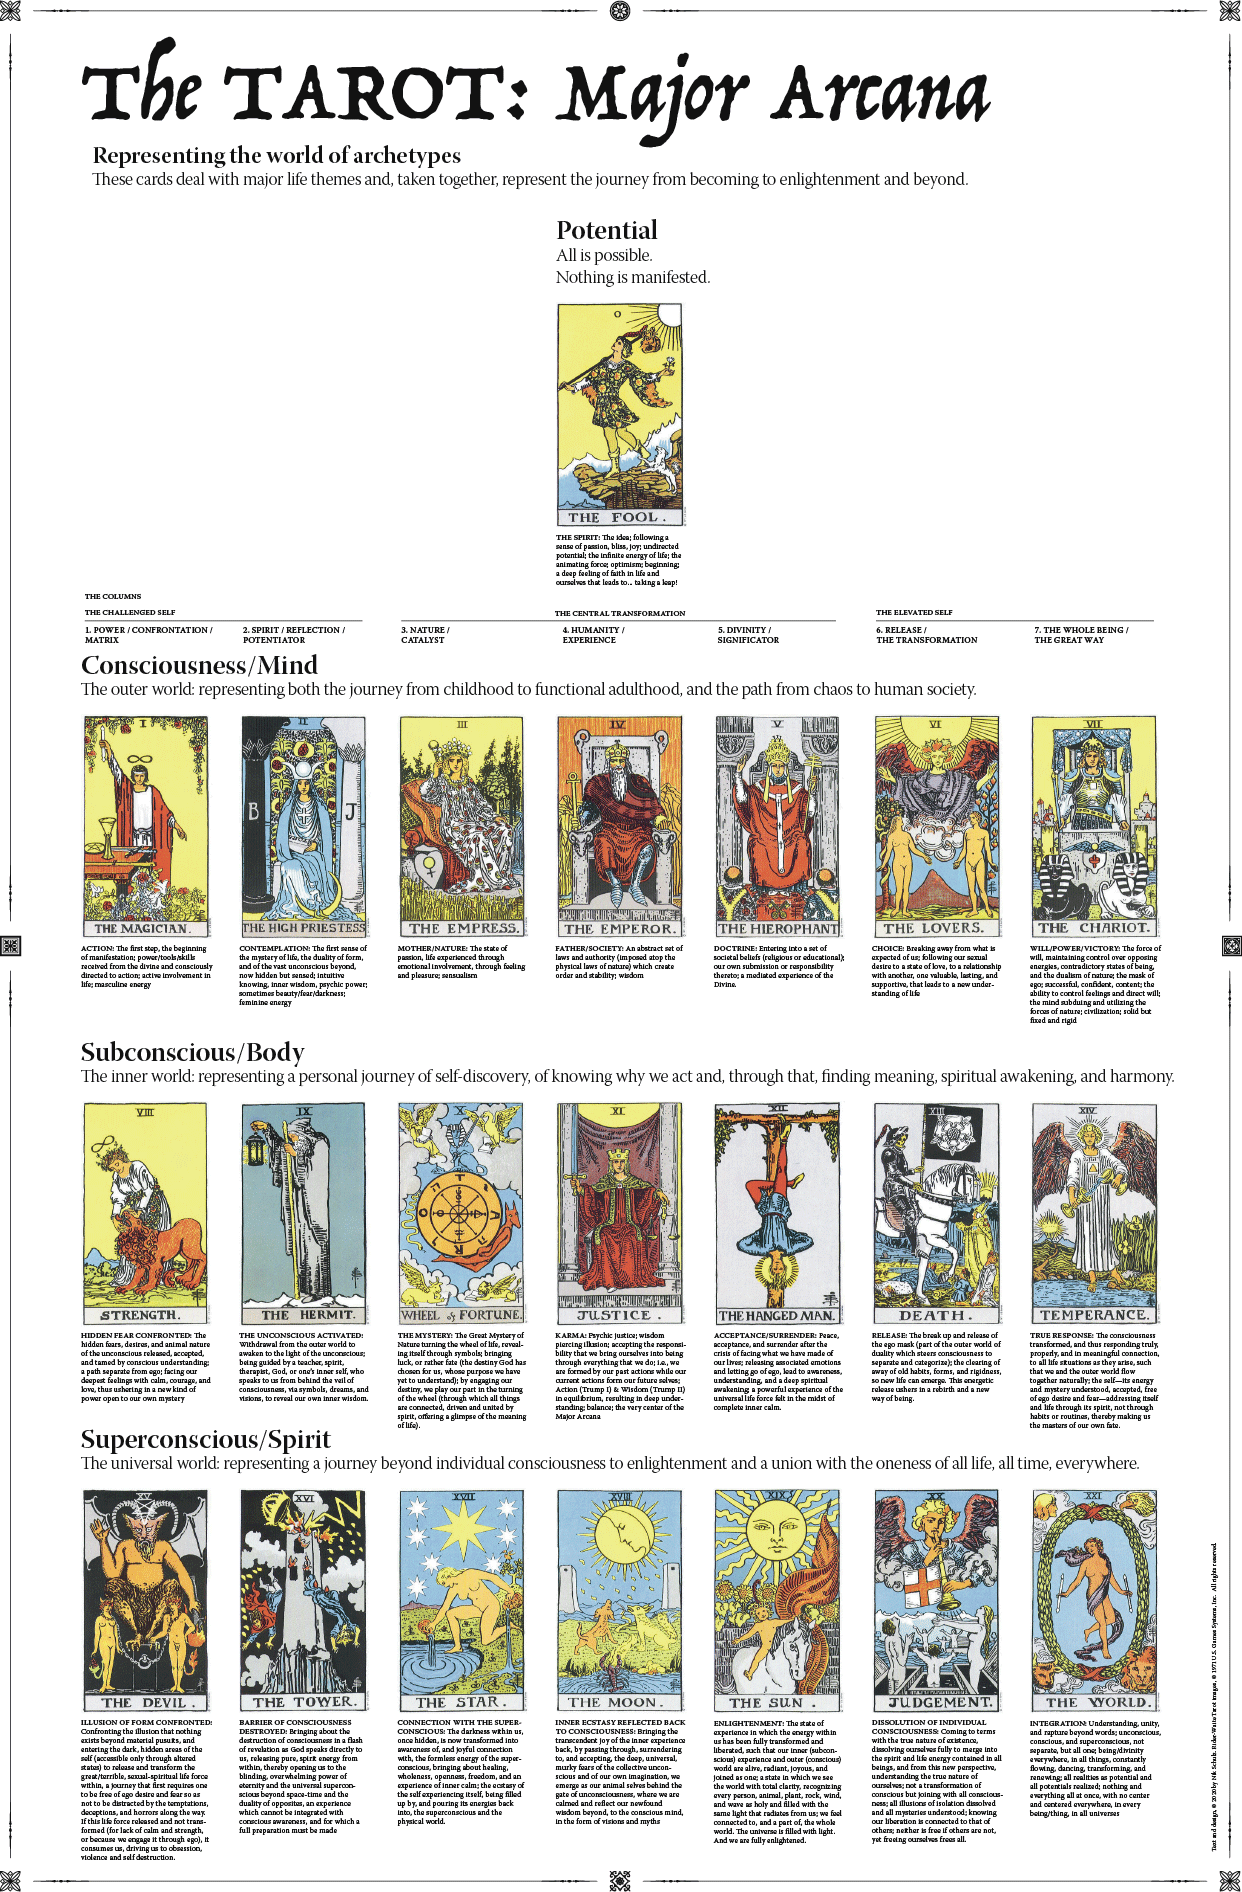 A Visual Guide to the Tarot’s Major Arcana, Print / Poster (Public)